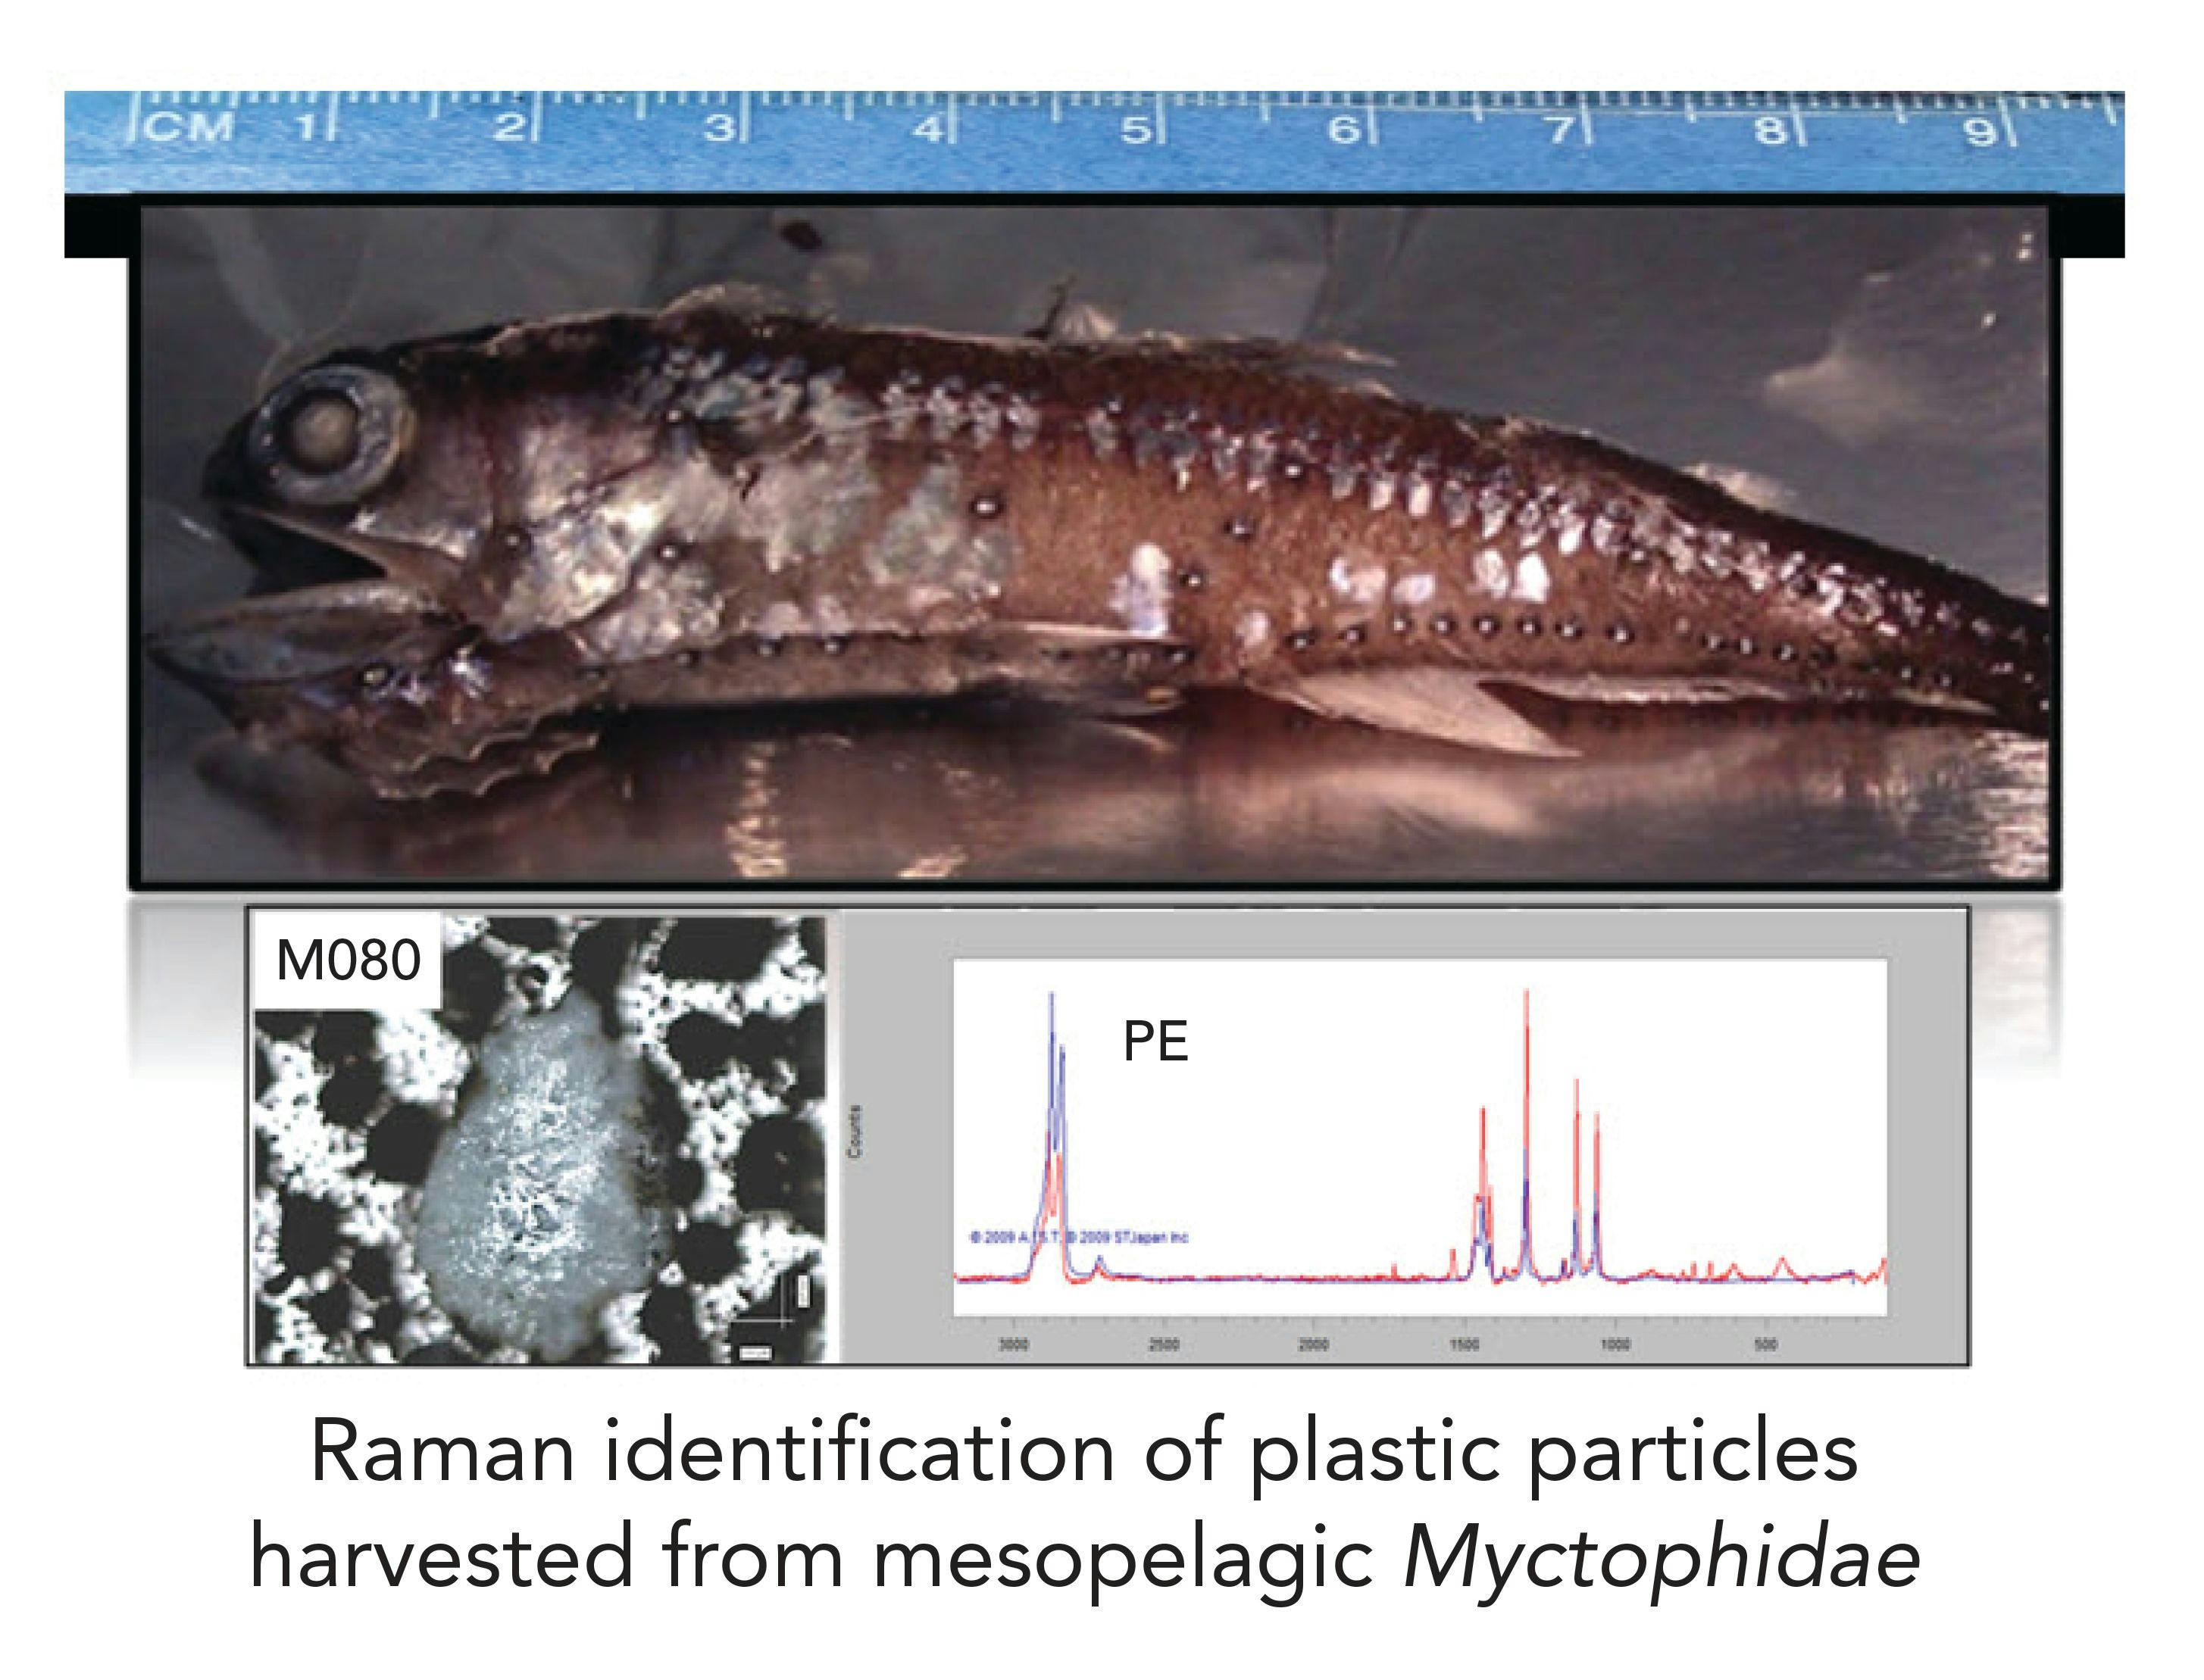 FIGURE 3: Plastic (PE) extracted from a 9 cm lanternfish (myctophid) in the Northern Pacific Ocean.